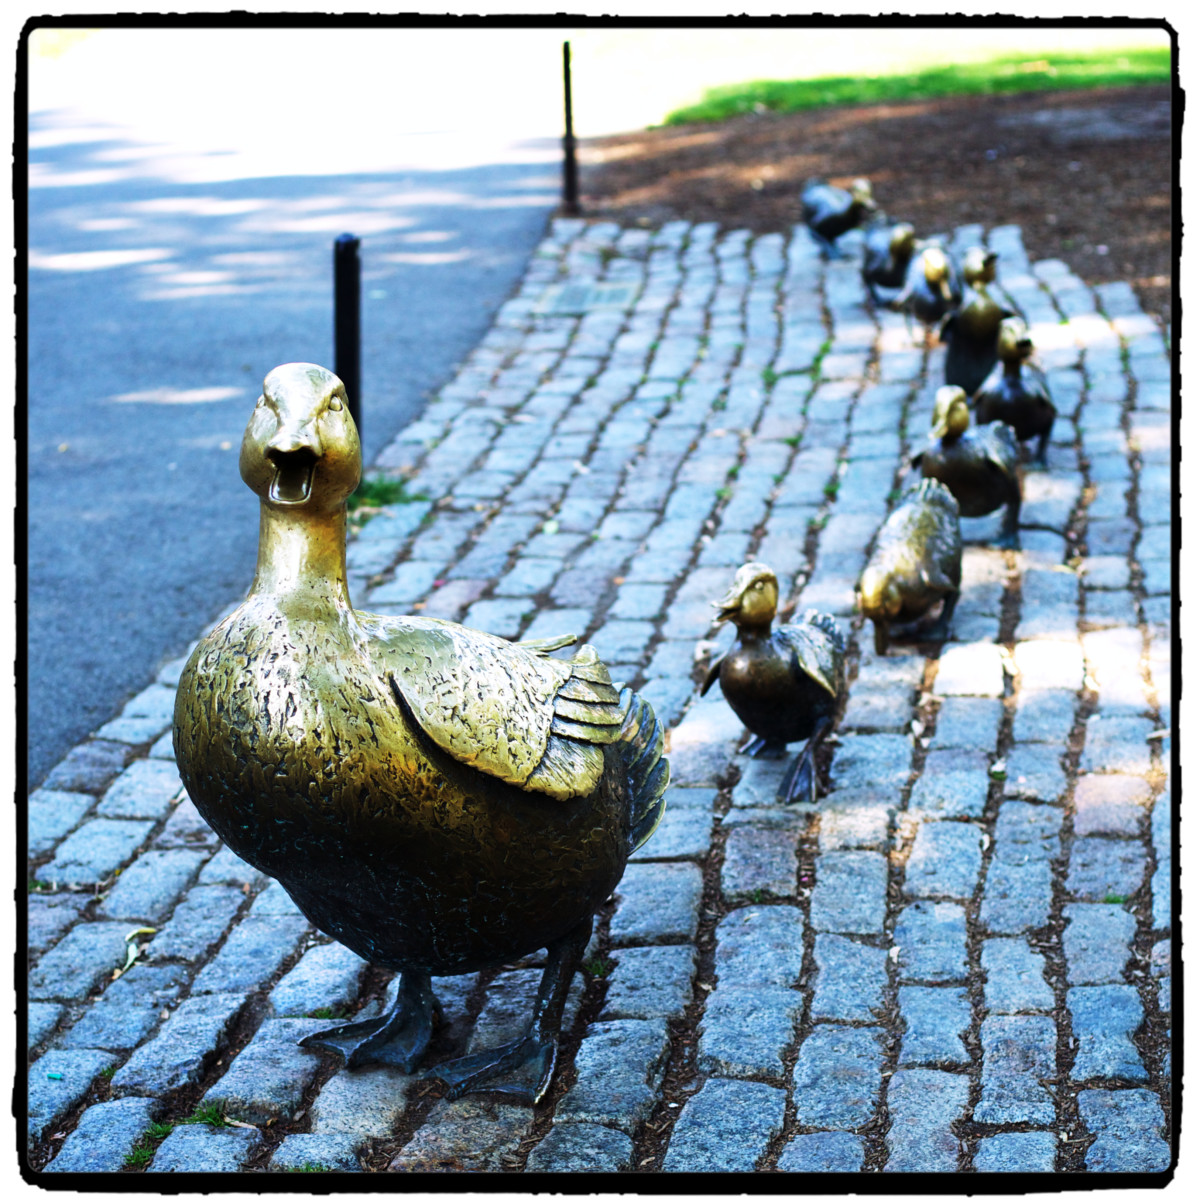 Duckling statues